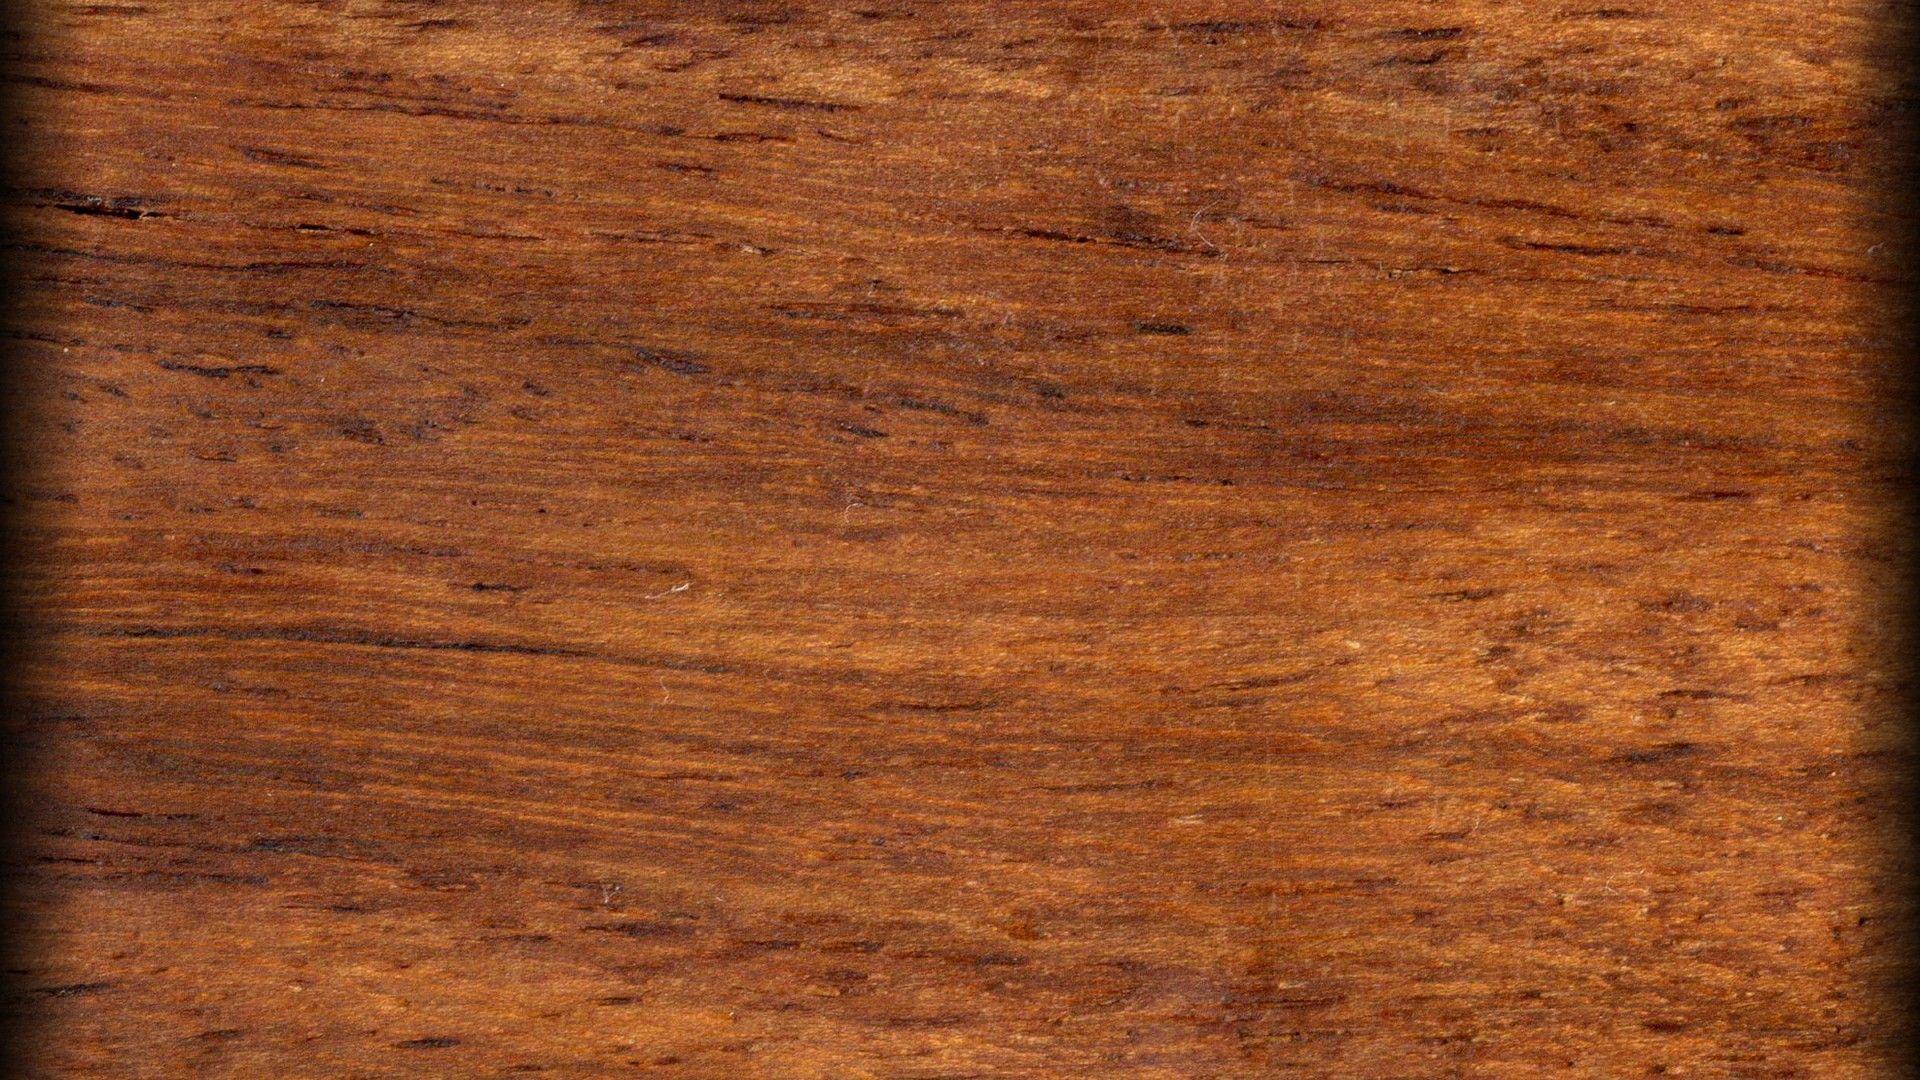 Download 1920x1080 Full HD 1080p 1080i wood background texture